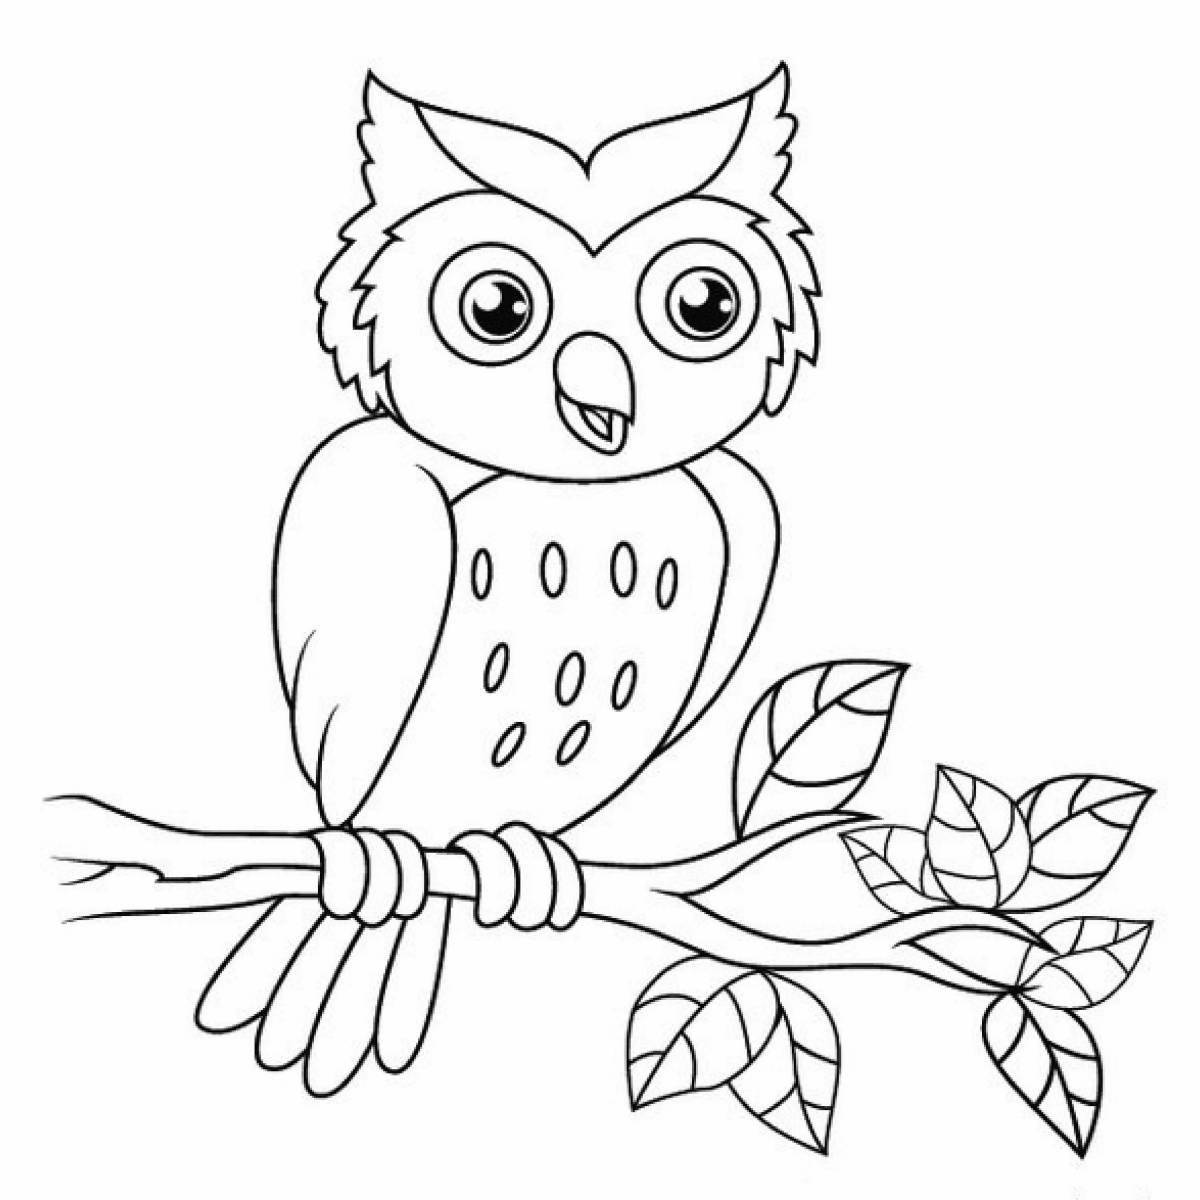 Exquisite owl coloring book for kids